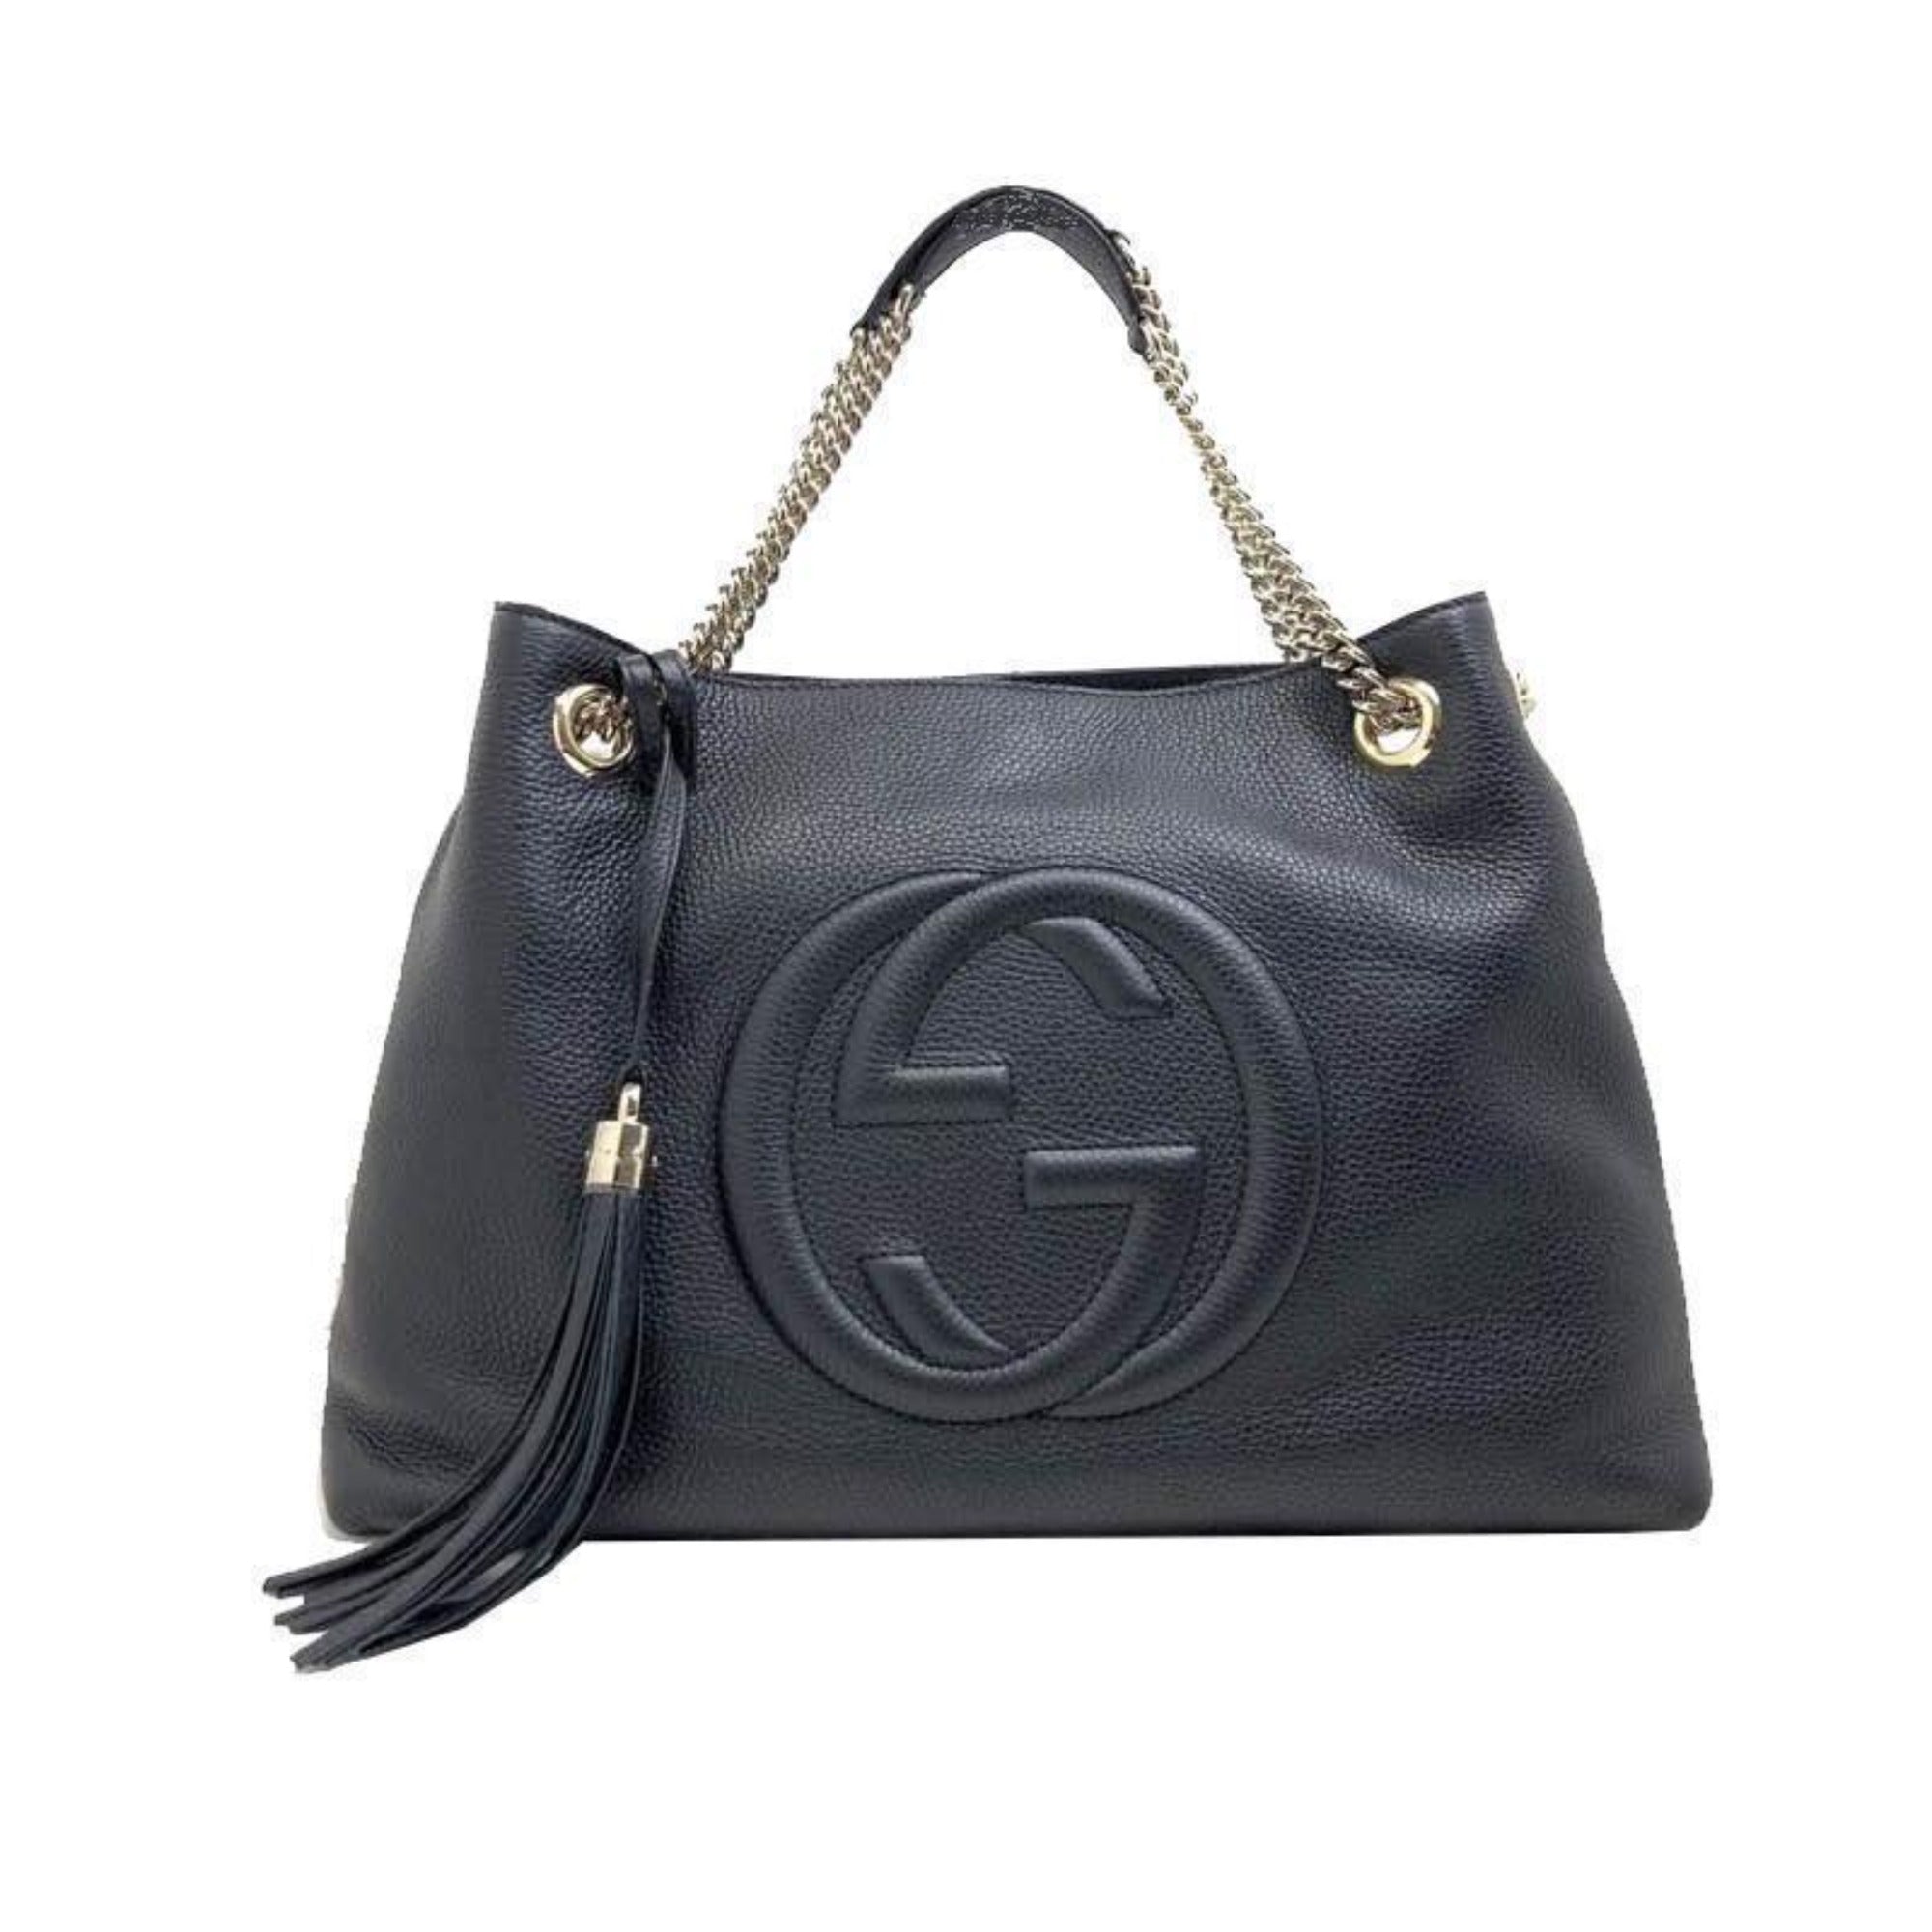 GUCCI GG Marmont 2.0 quilted leather shoulder bag | Gucci leather bag,  Black gucci bag, Bags